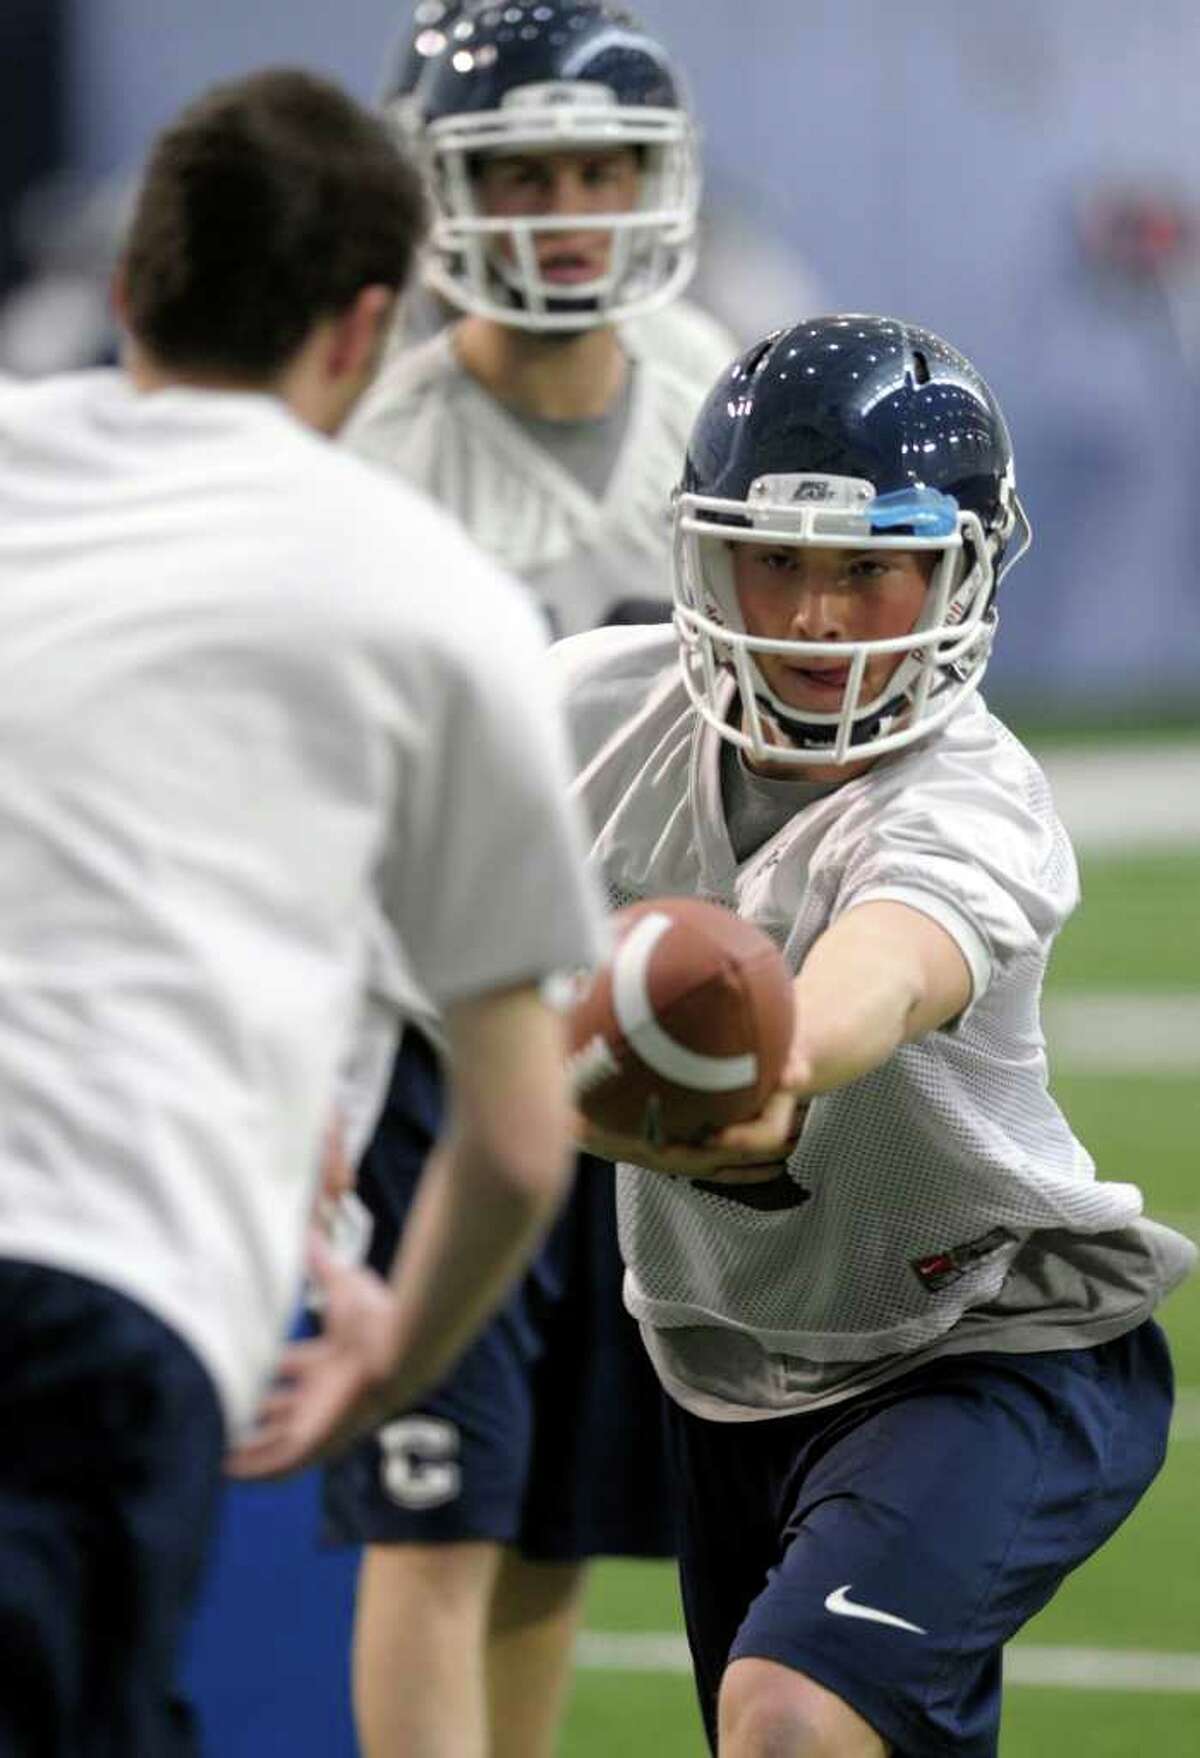 Connecticut quarterback Casey Cochran hands the ball off during the first day of the team's spring NCAA college football practice, Tuesday, March 20, 2012, in Storrs, Conn. (AP Photo/Sean D. Elliot,The Day) MANDATORY CREDIT: SEAN D. ELLIOT/THE DAY